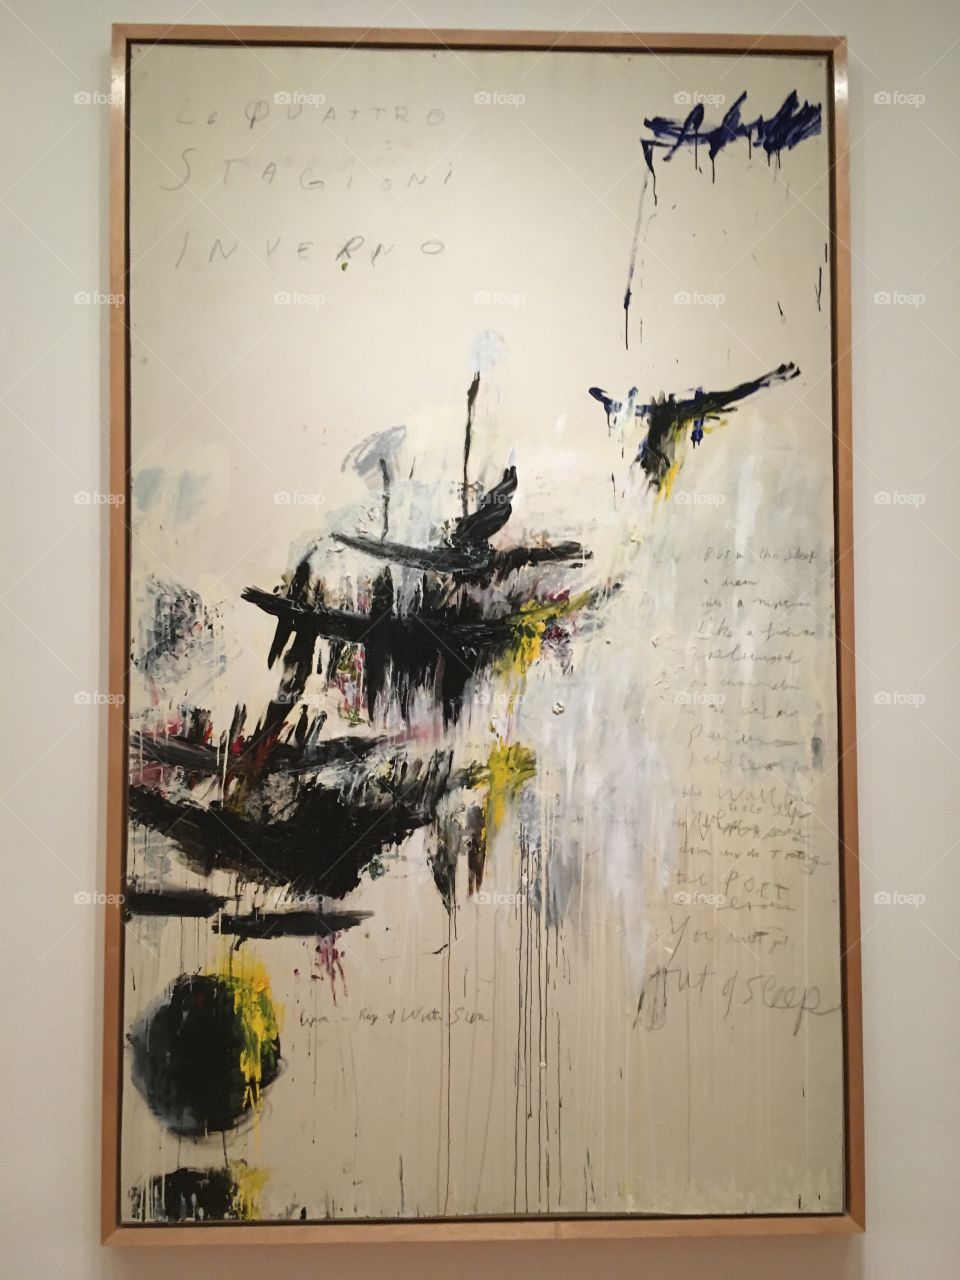 Cy Twombly - The Four Seasons - MoMA - Manhattan - New York City 